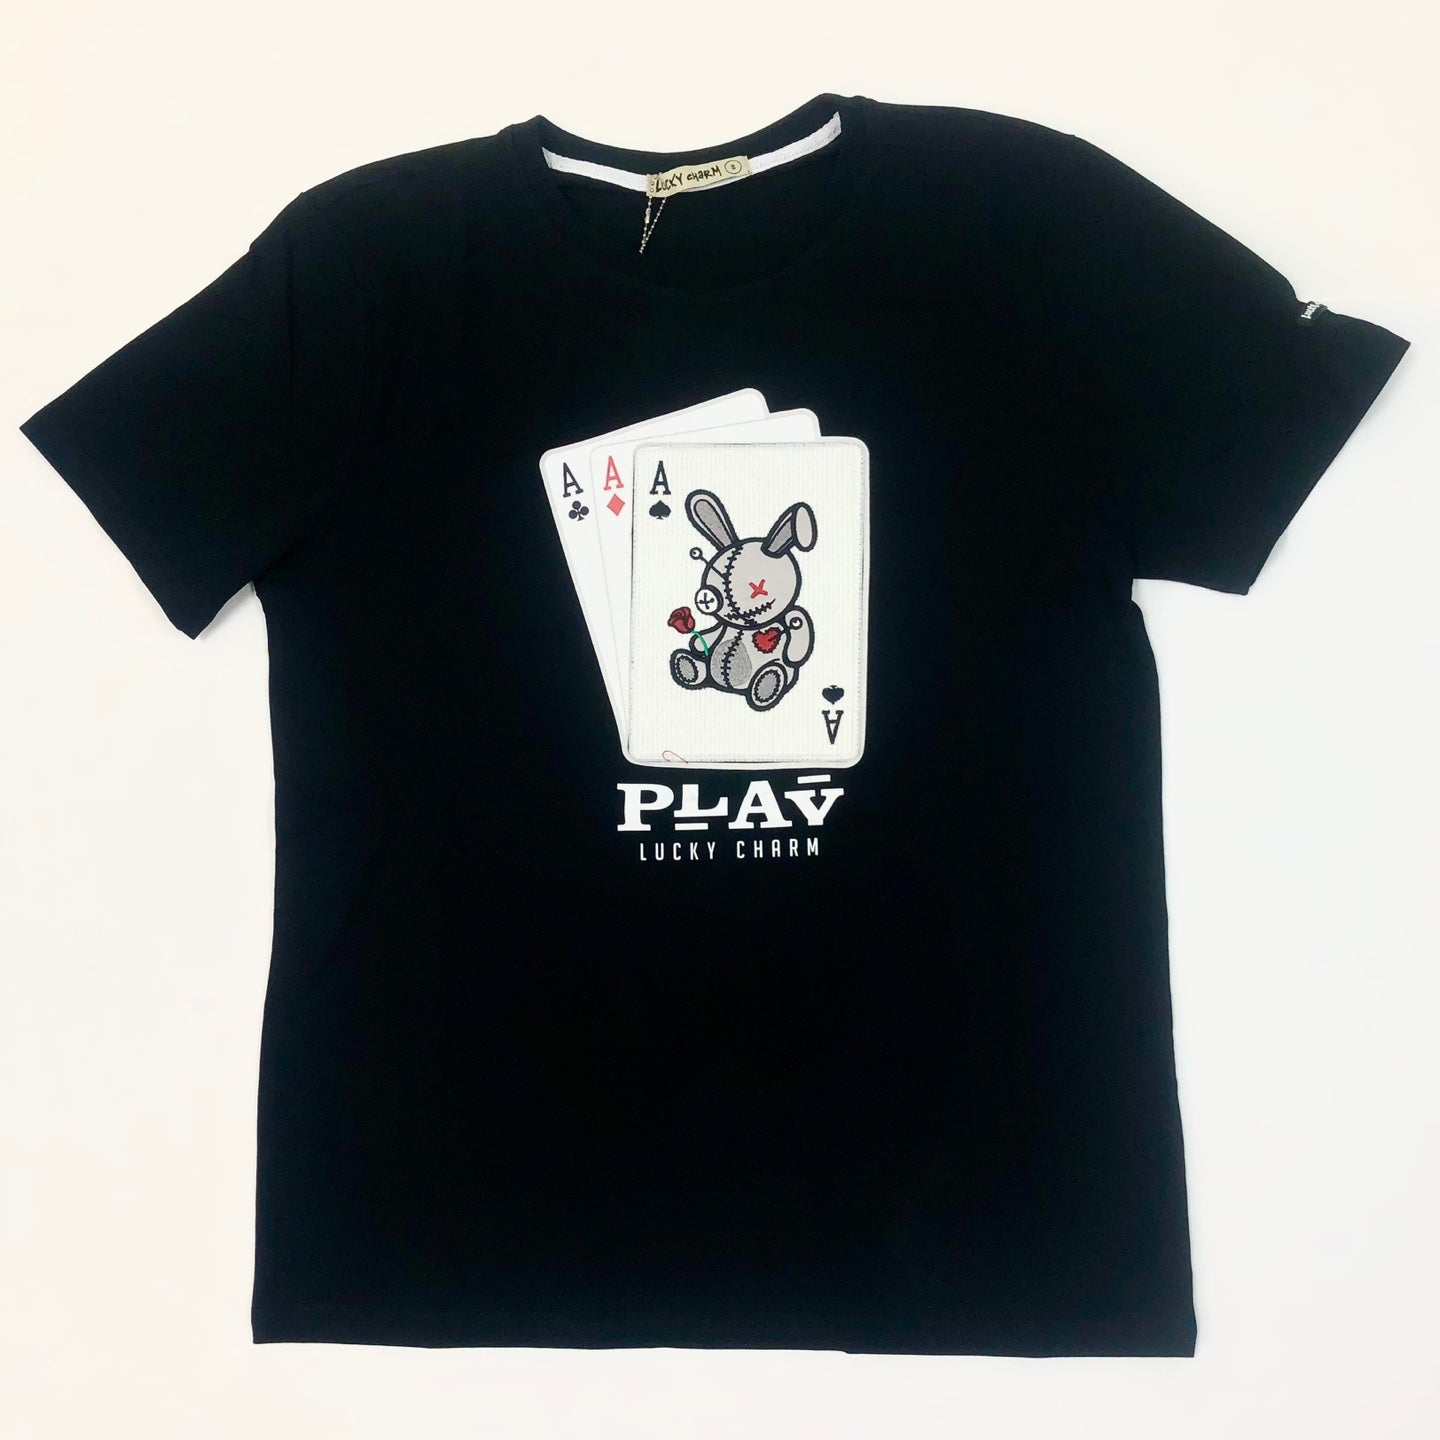 BKYS Lucky Charm Ace Play Graphic T-Shirt